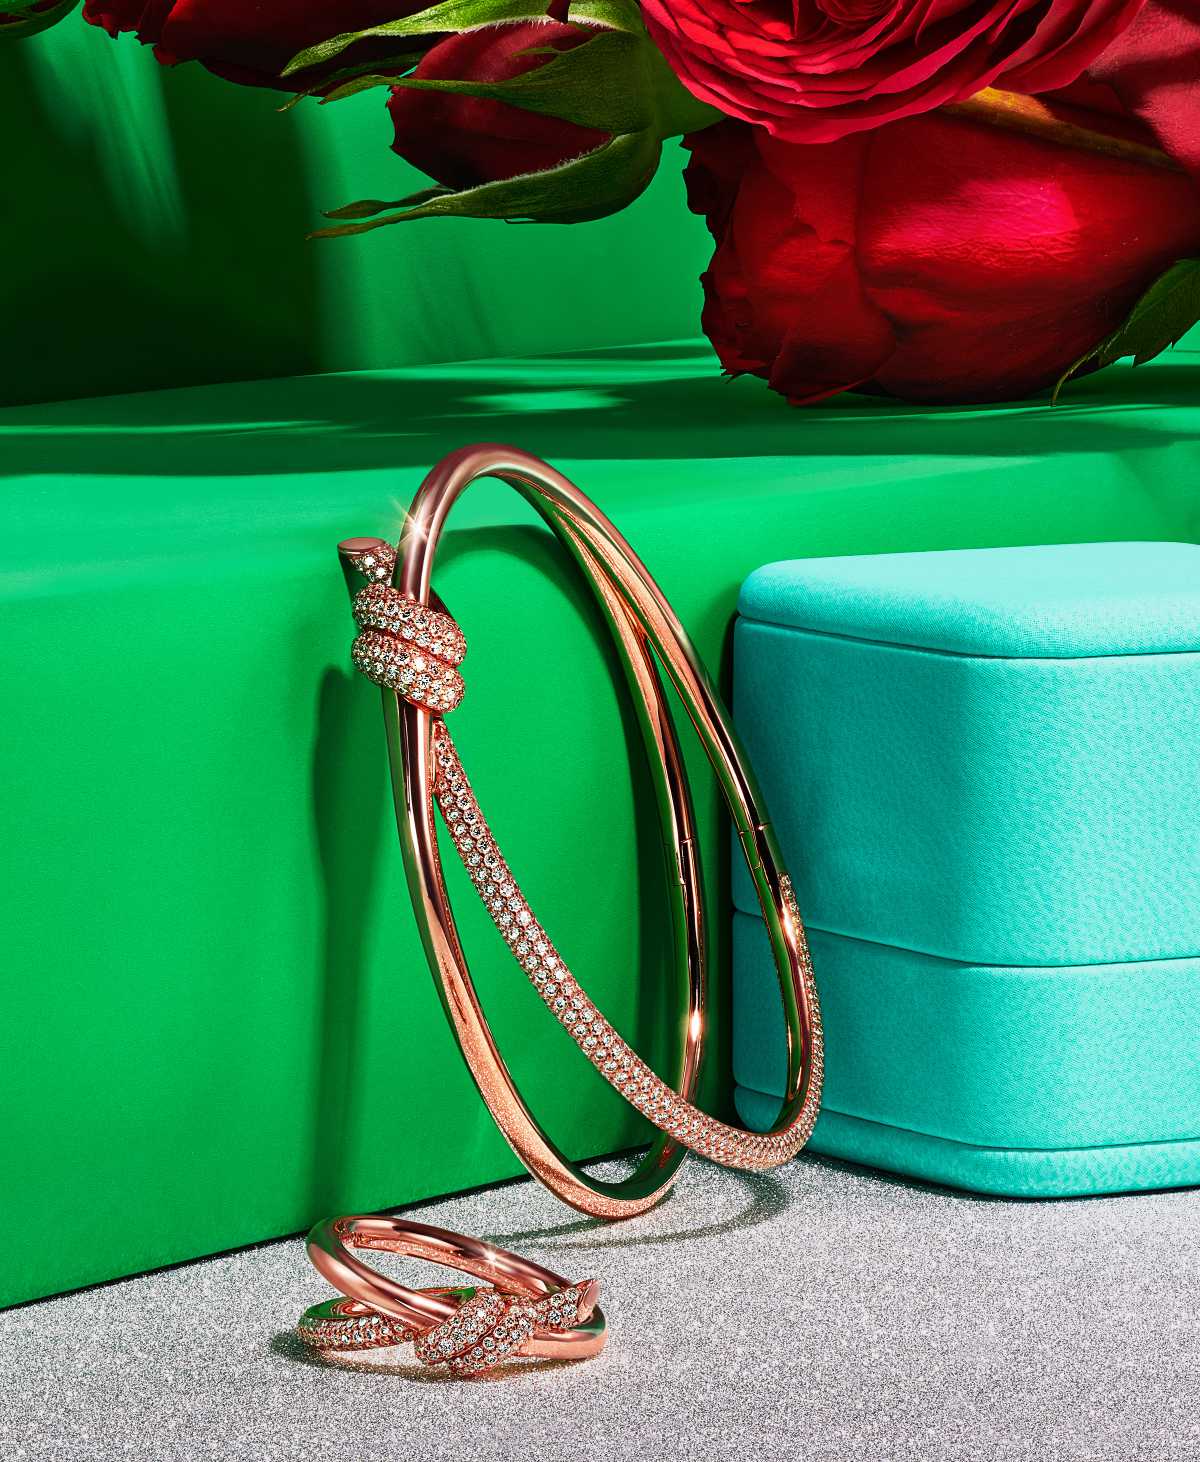 Tiffany & Co. X Andy Warhol Limited-Edition Collection